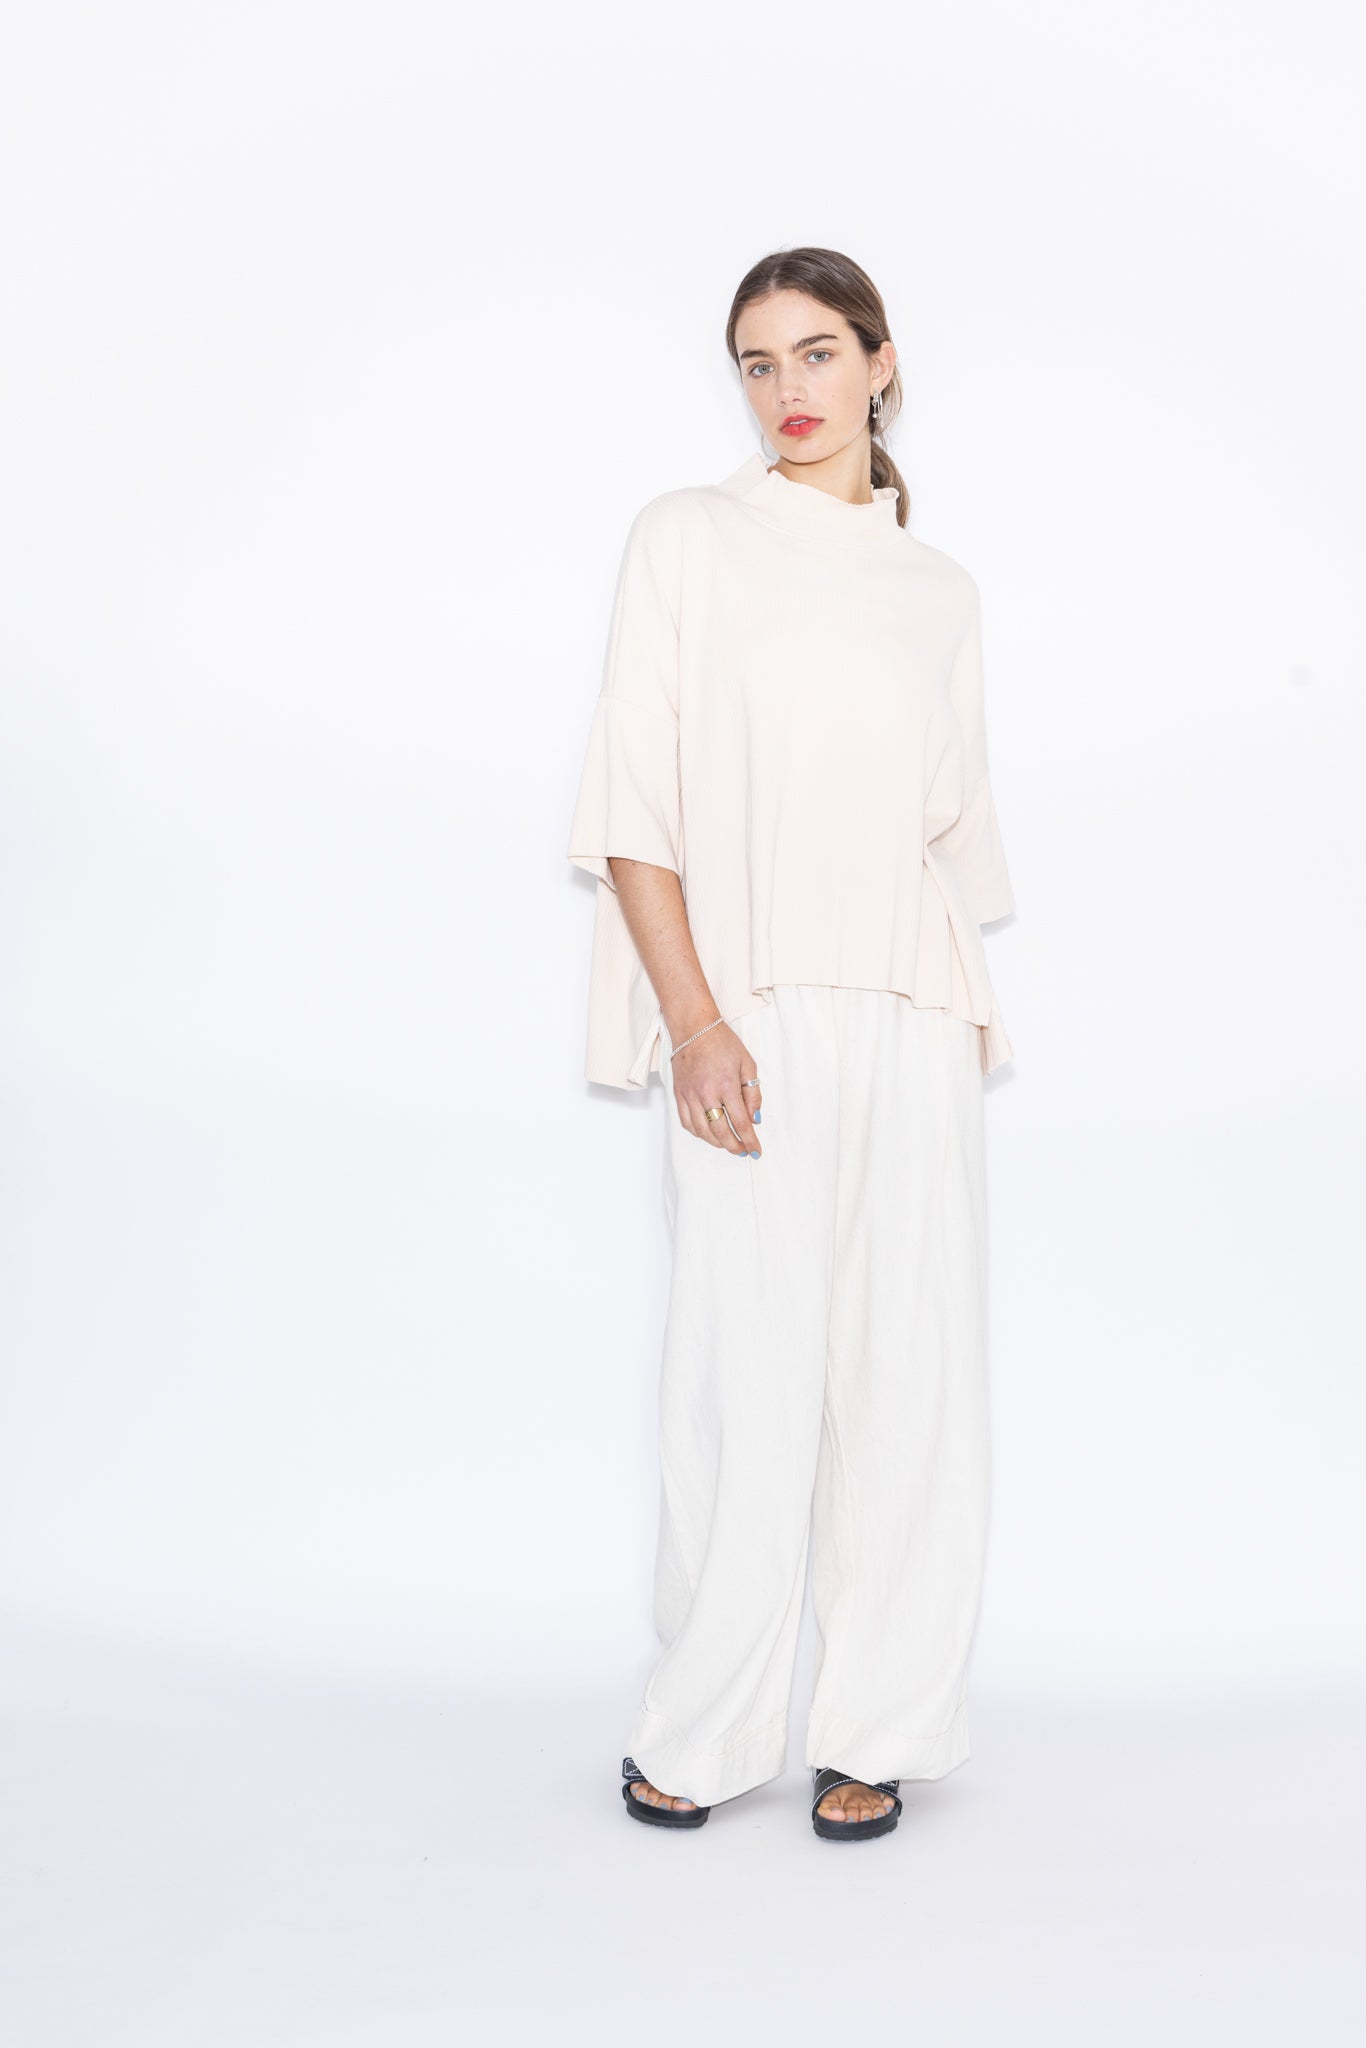 Company of Strangers Store | Shop women’s fashion & accessories online